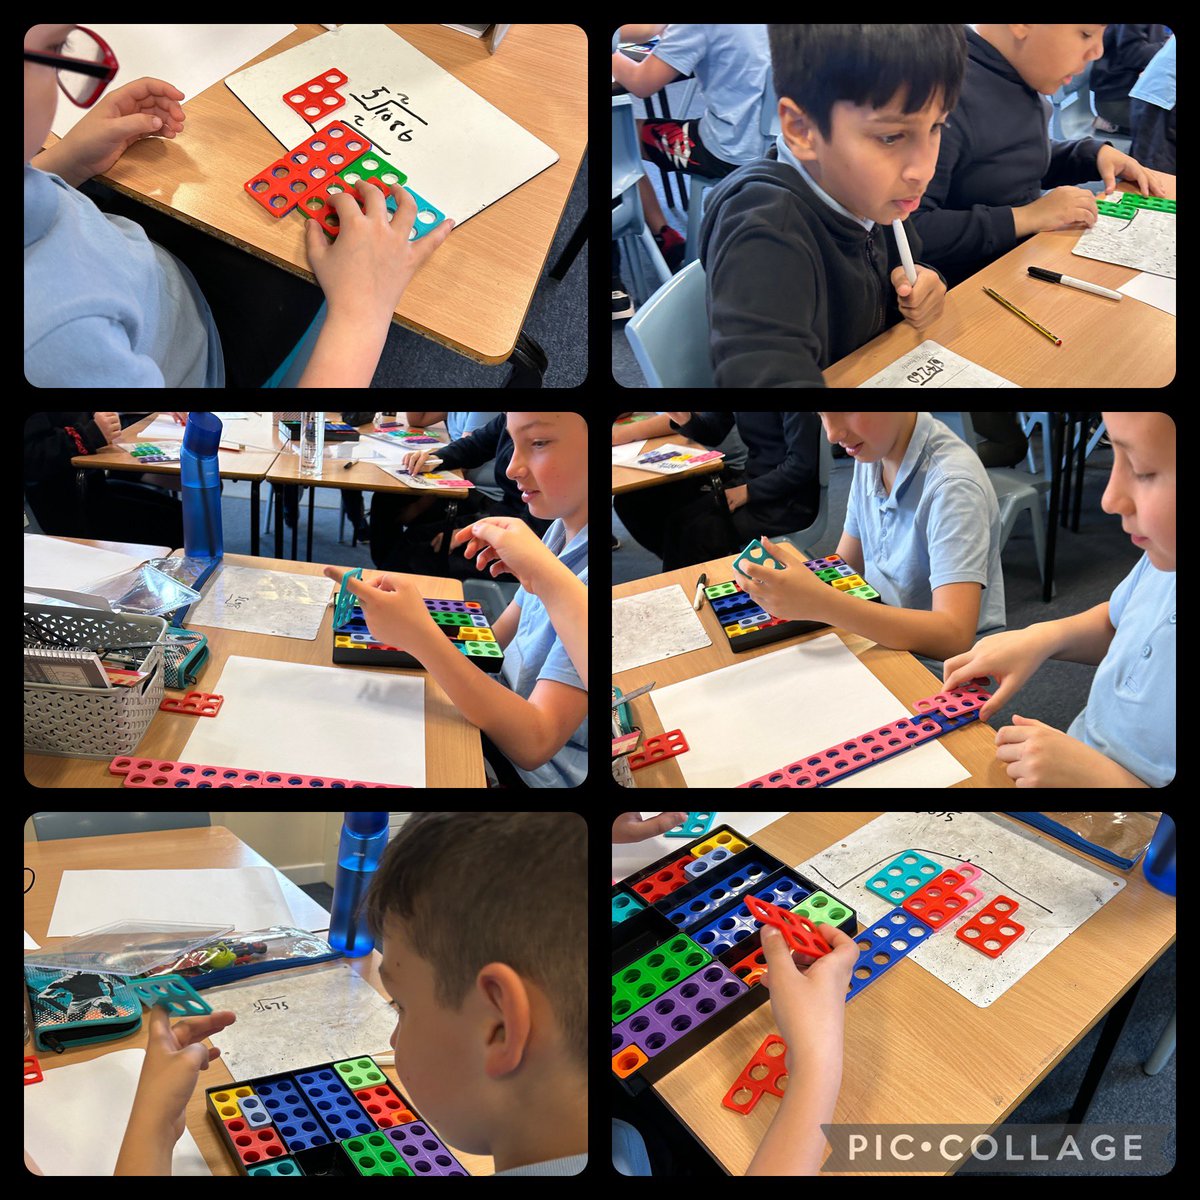 This morning P6 were using the numicon to work on their division skills @SLCNumeracy @SLC_RAiSE @EducationSLC #MathsDay #Numicon #TeamBurgh #DREAMBigatBurgh